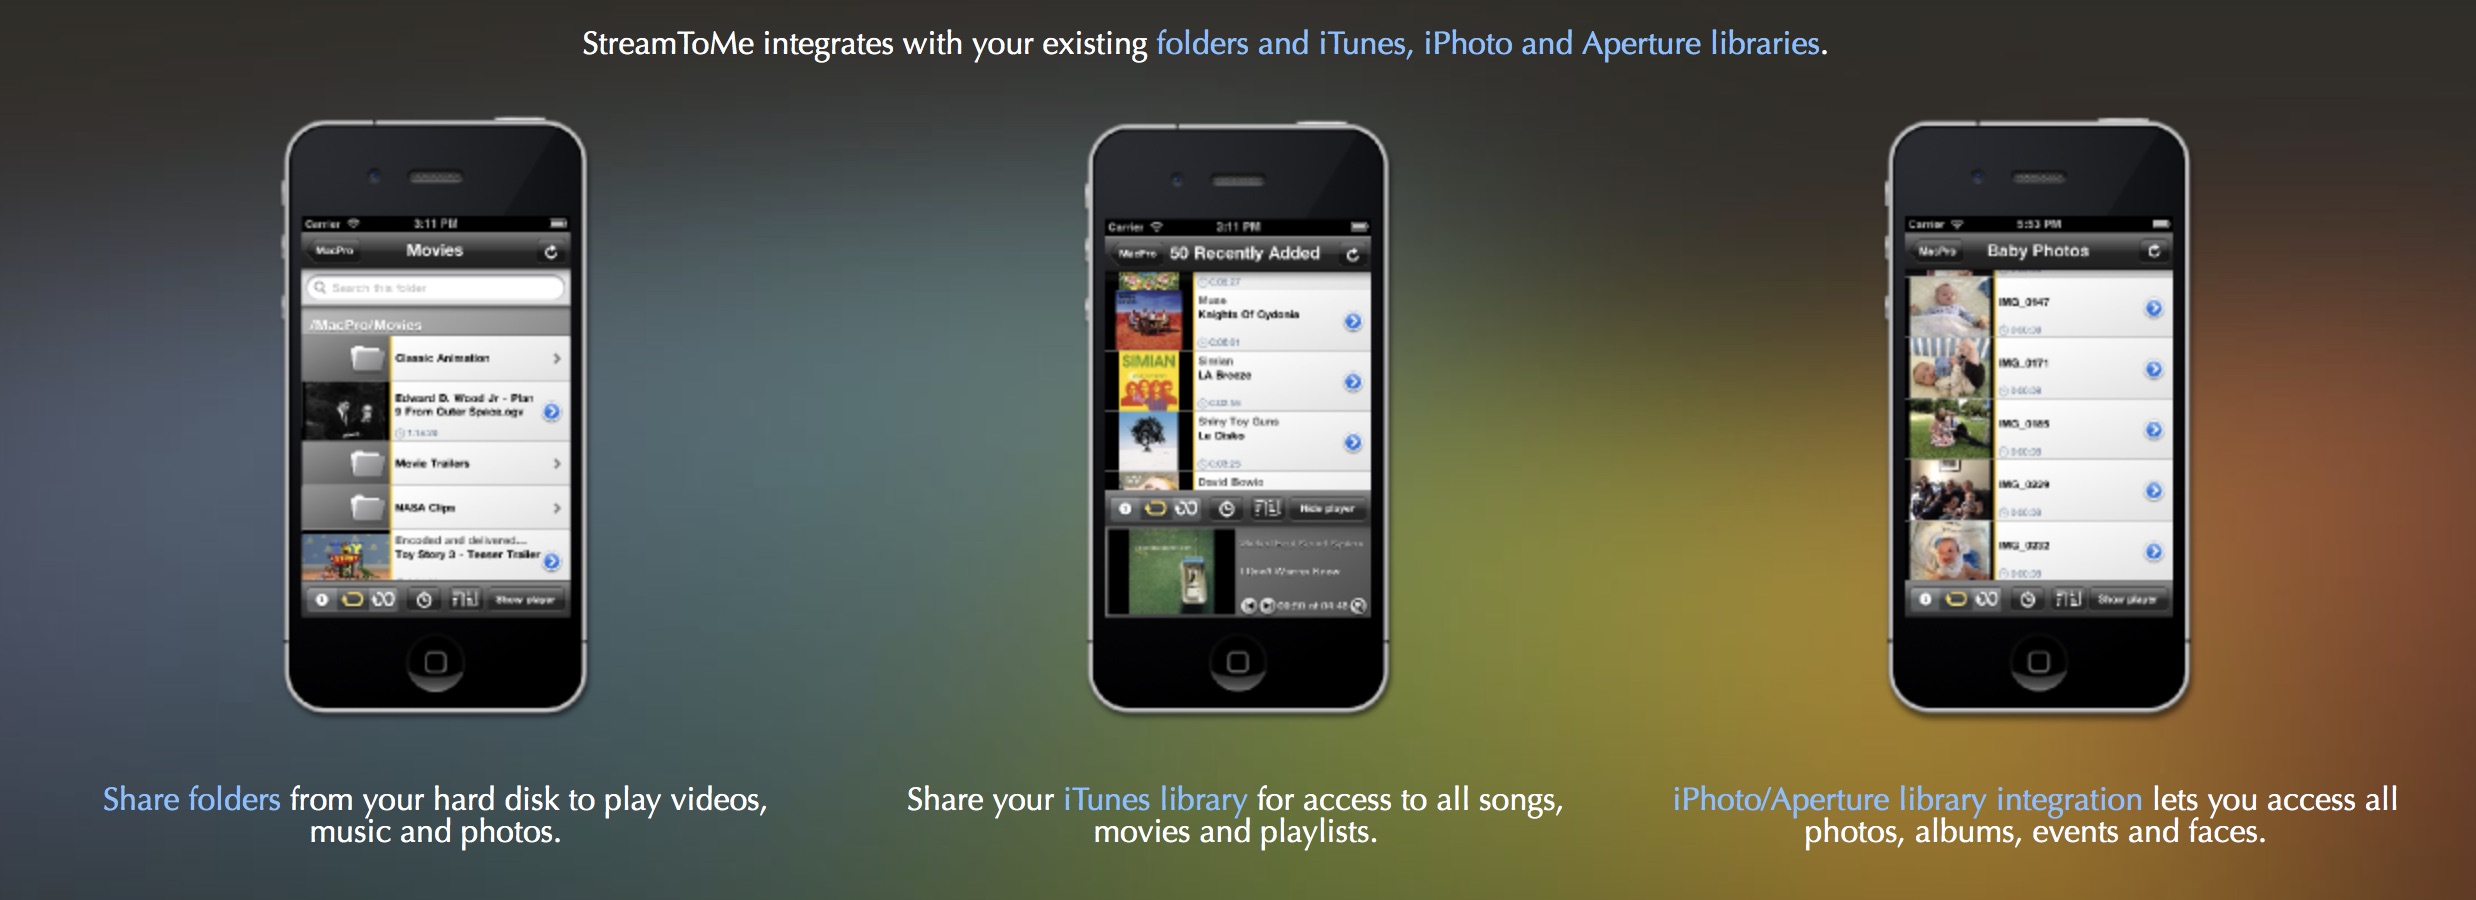 Some StreamToMe promotional screenshots from the iOS 6 era. ‘member Aperture?